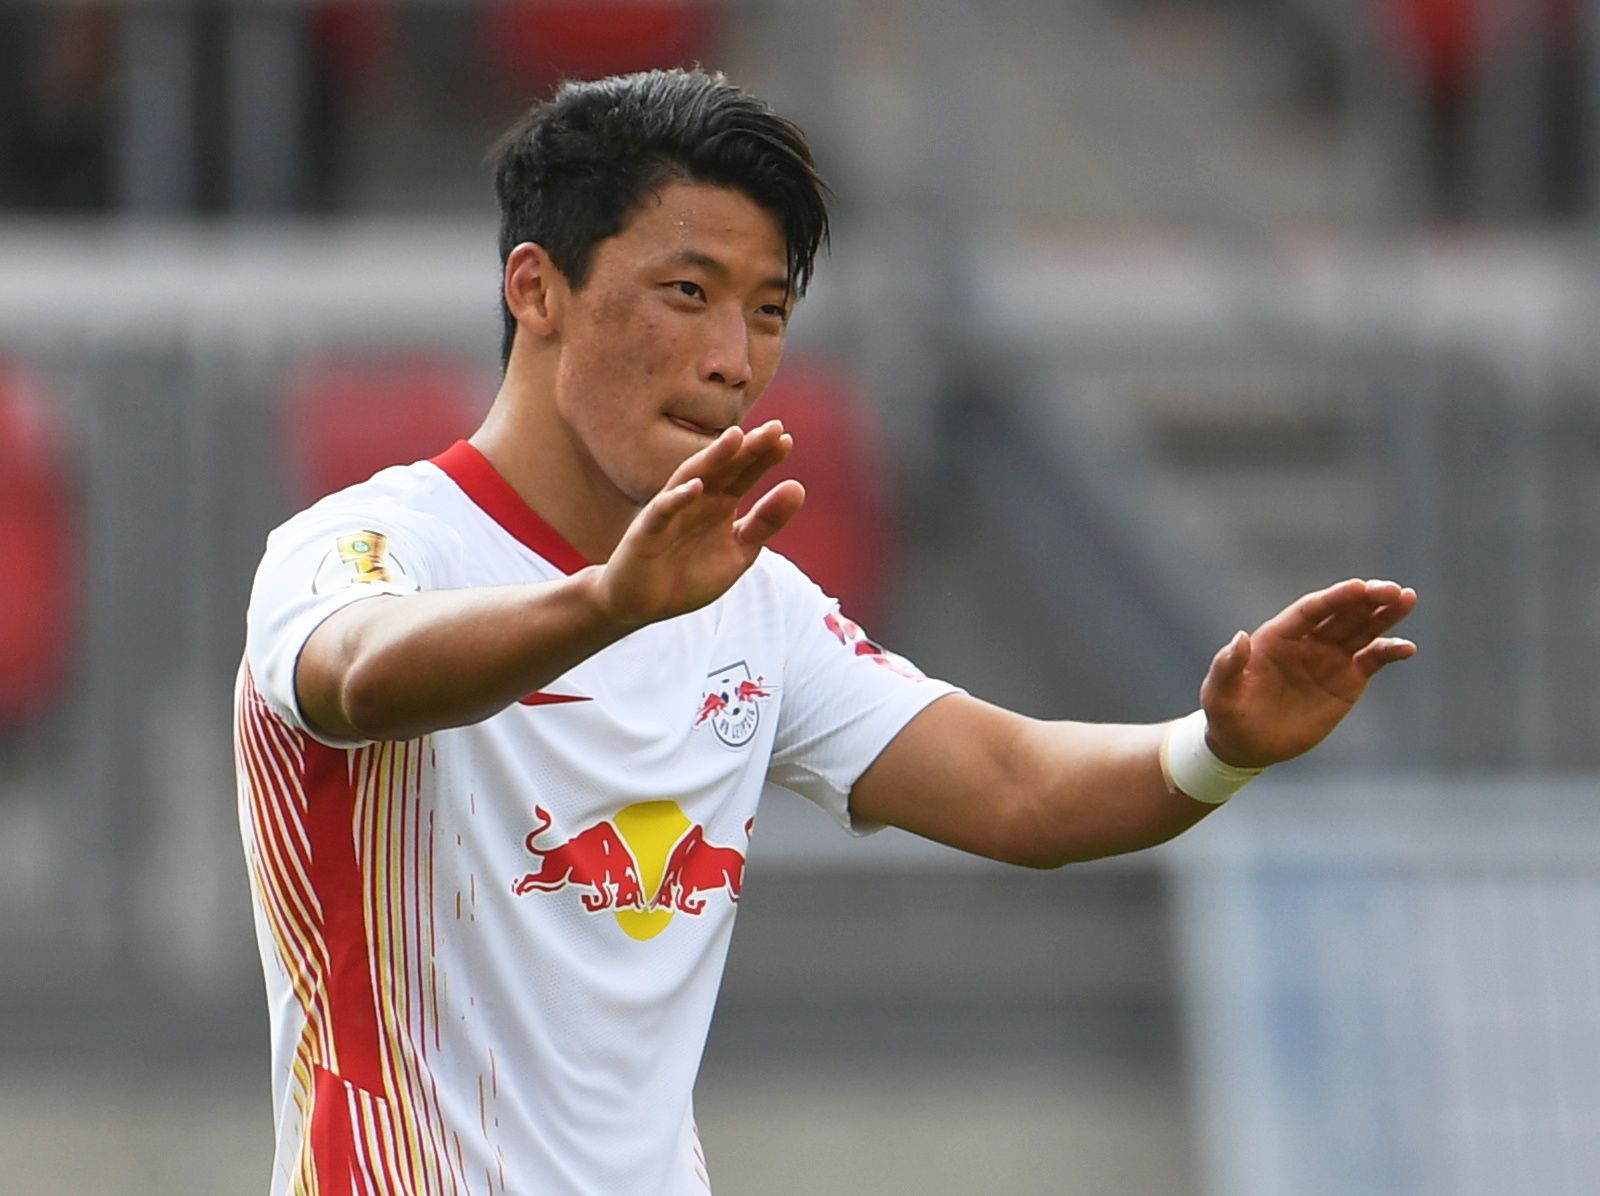 Soccer Football - DFB Cup - First Round - 1. FC Nurnberg v RB Leipzig - Max-Morlock-Stadion, Nuremberg, Germany - September 12, 2020  RB Leipzig's Hwang Hee-Chan celebrates scoring their third goal      REUTERS/Andreas Gebert/Pool  DFB regulations prohibit any use of photographs as image sequences and/or quasi-video